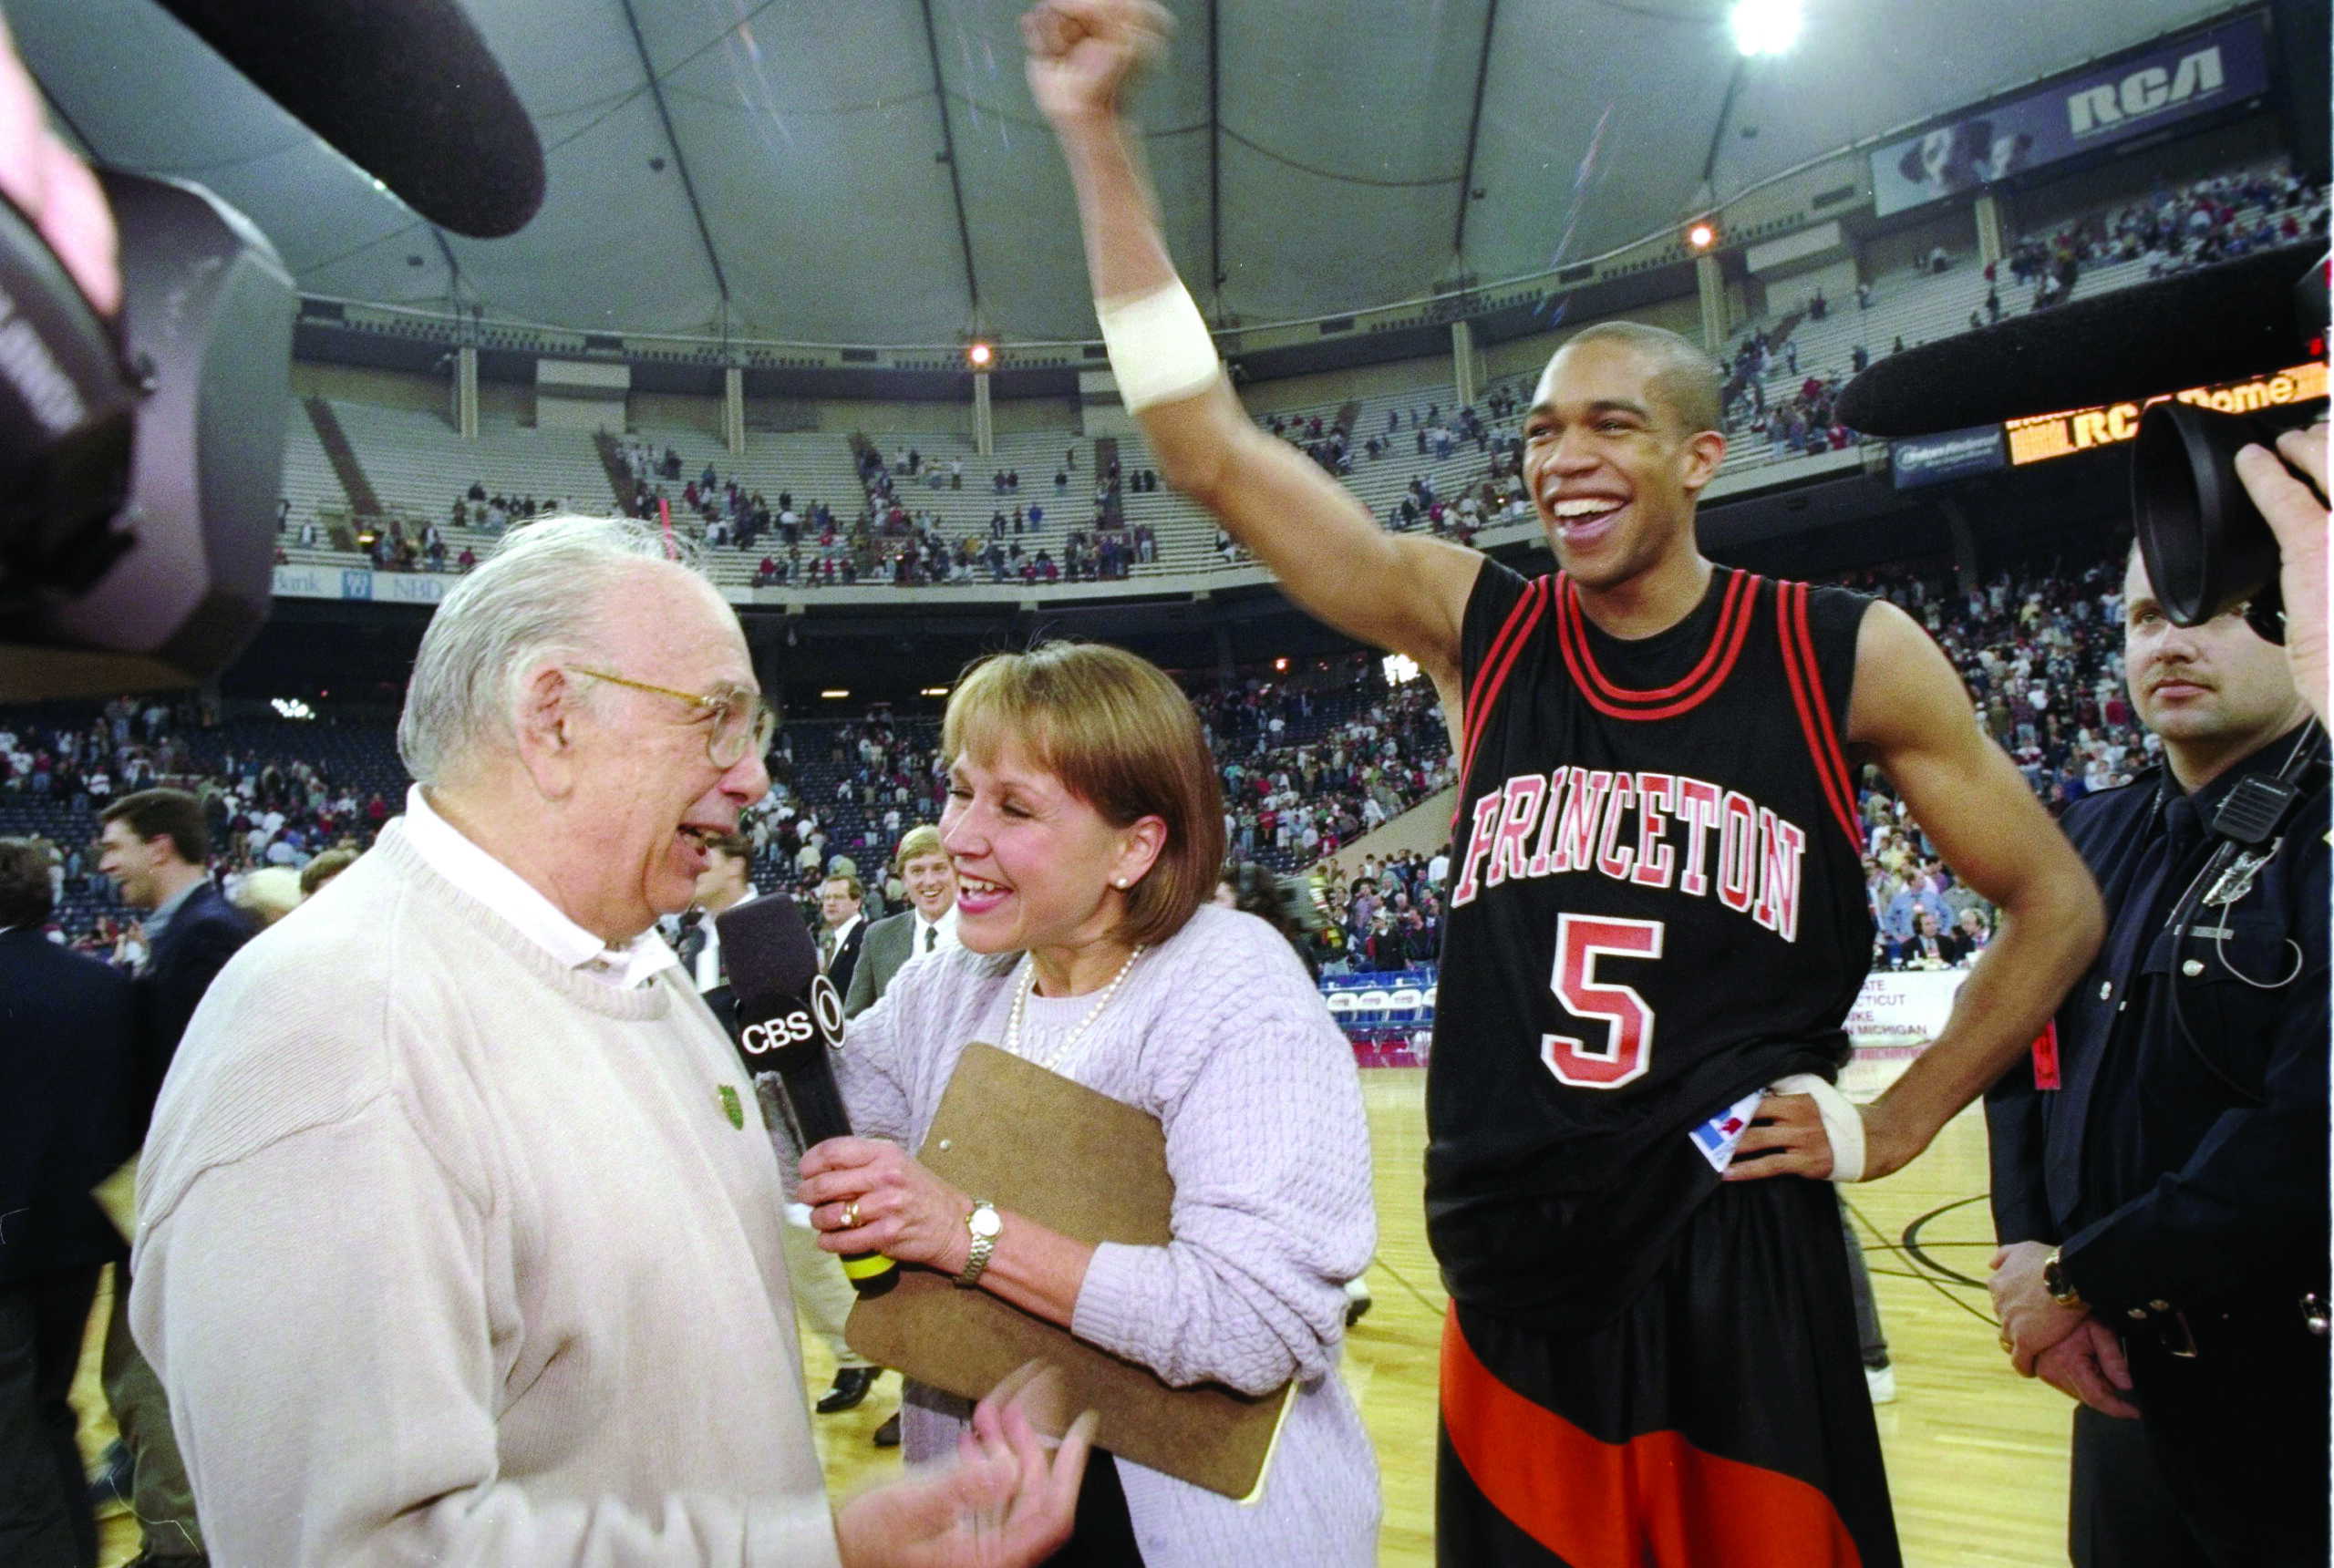 Pete Carril, left, in a tan sweater, speaks into a microphone held by Andrea Joyce, center. Right is Sydney Johnson in a Princeton basketball uniform. They are standing in a basketball arena.